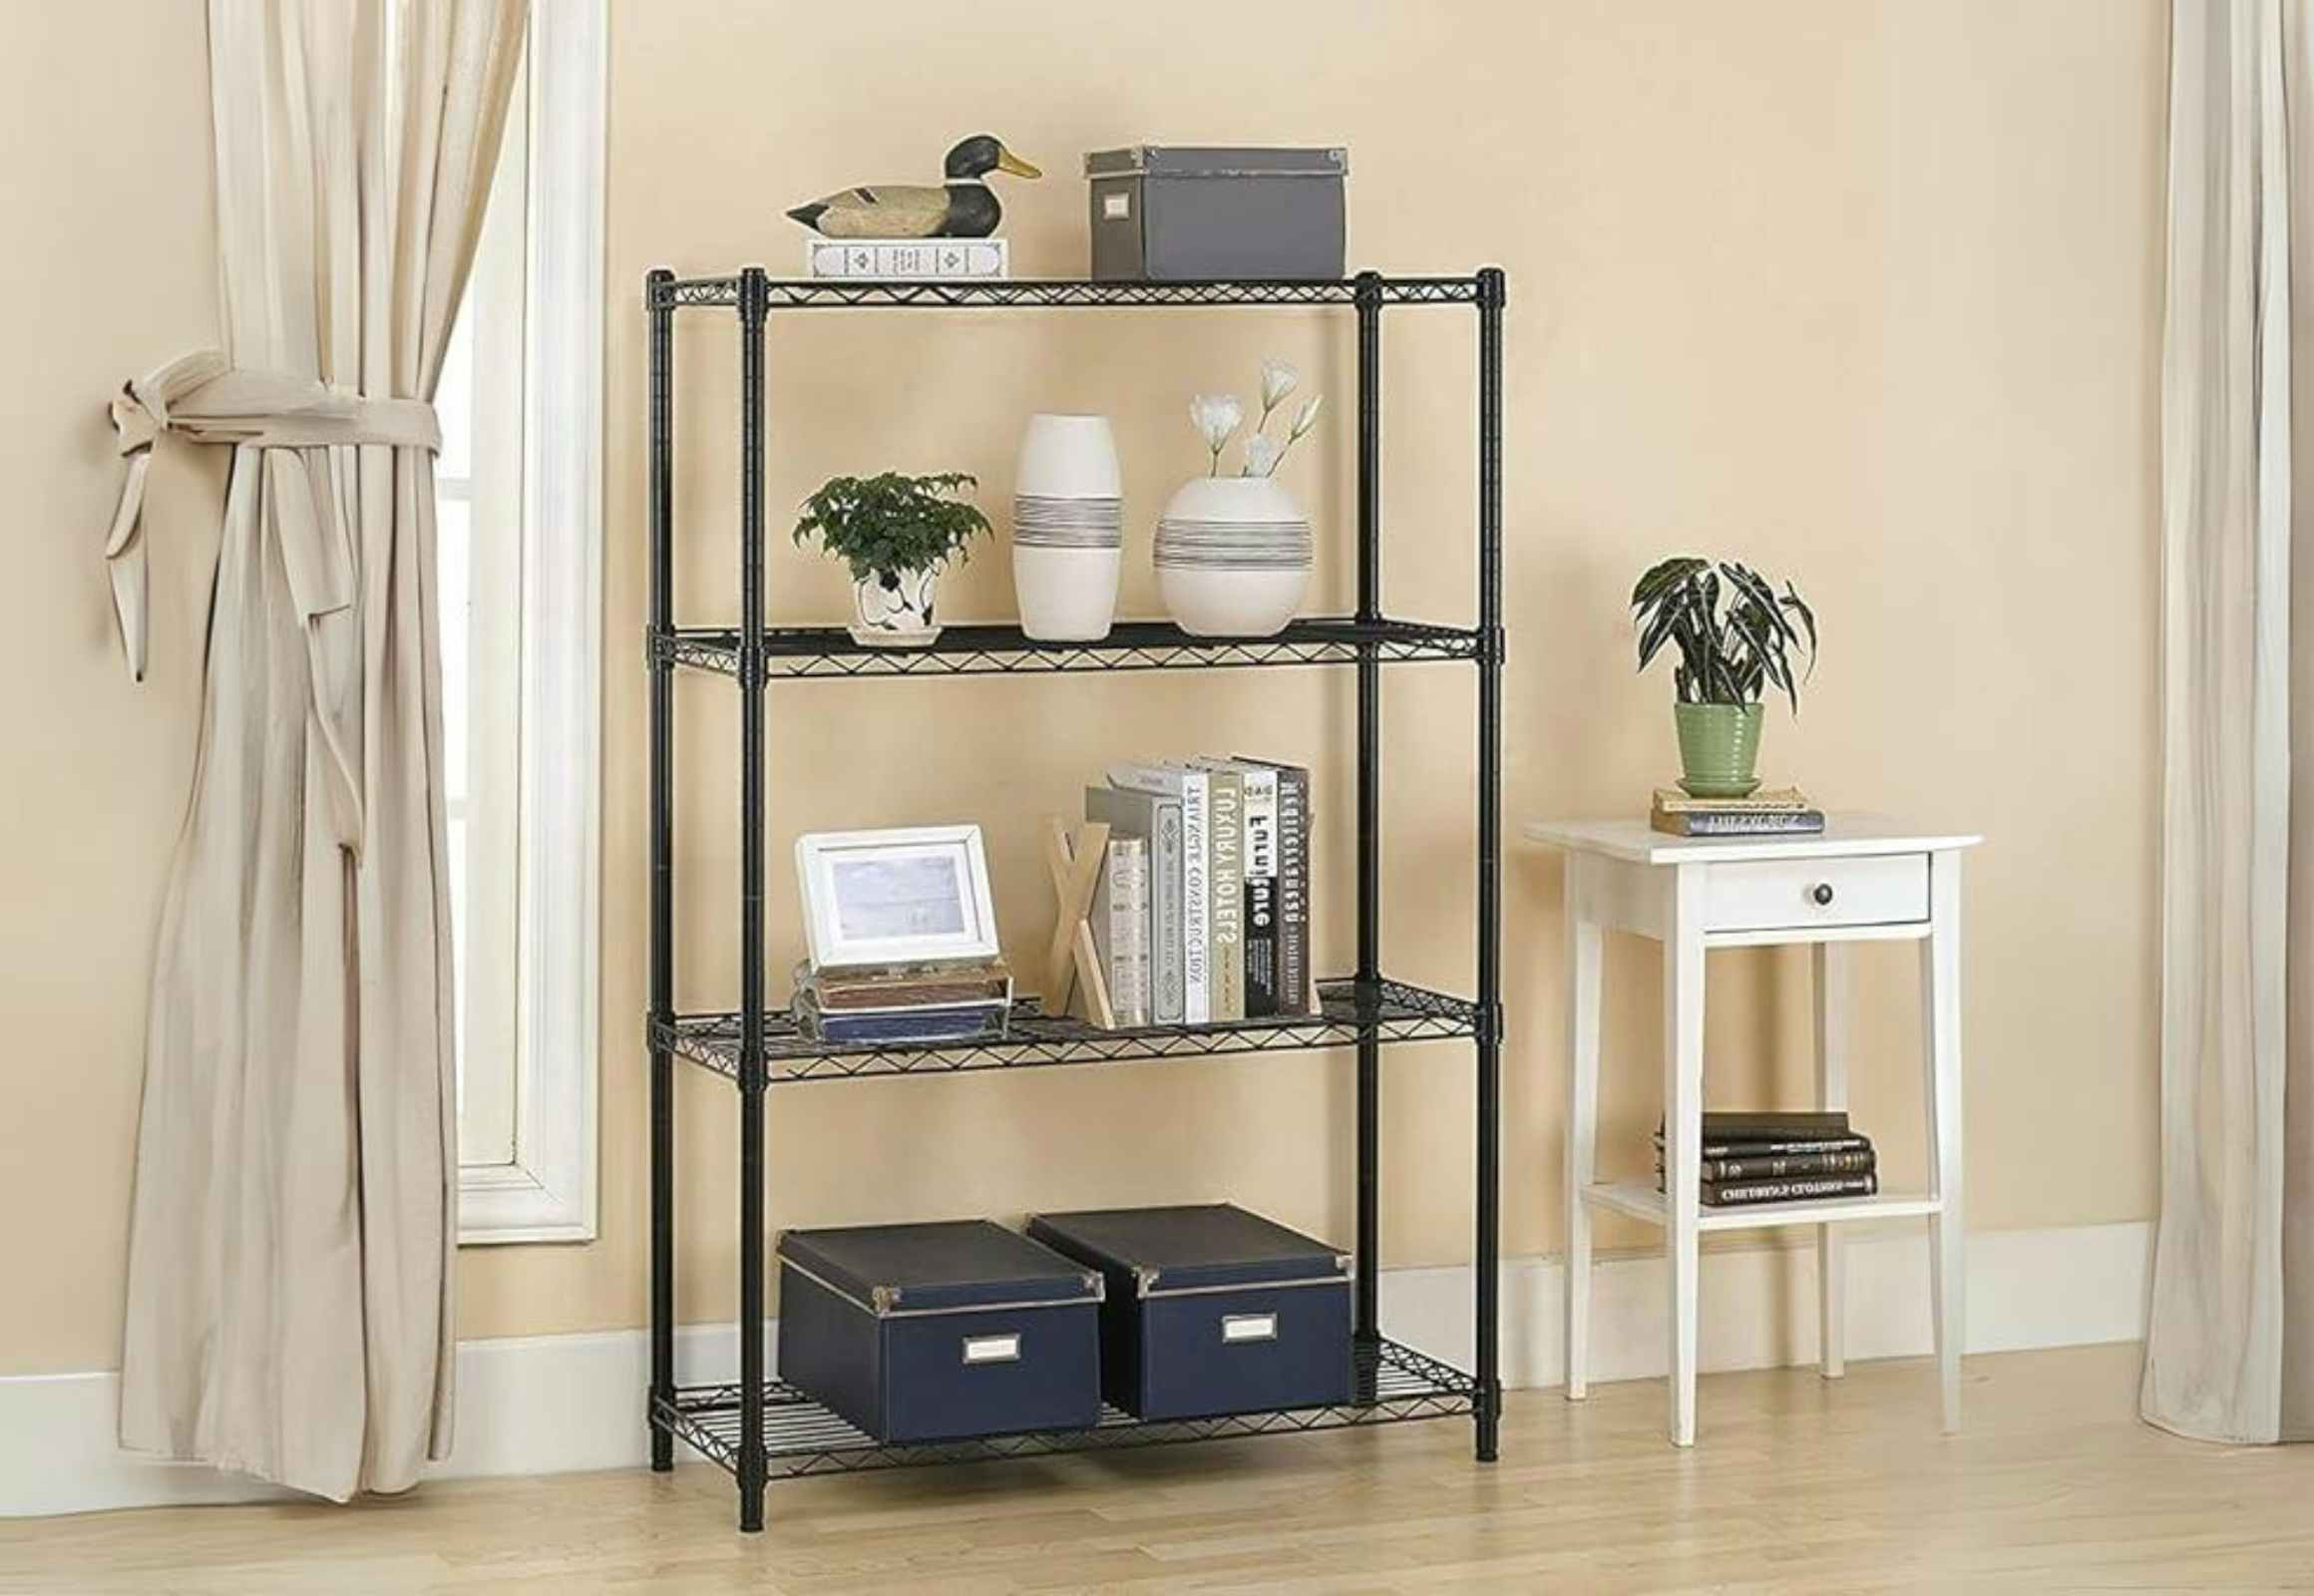 4-Tier Shelving Unit, Only $39.99 on Amazon